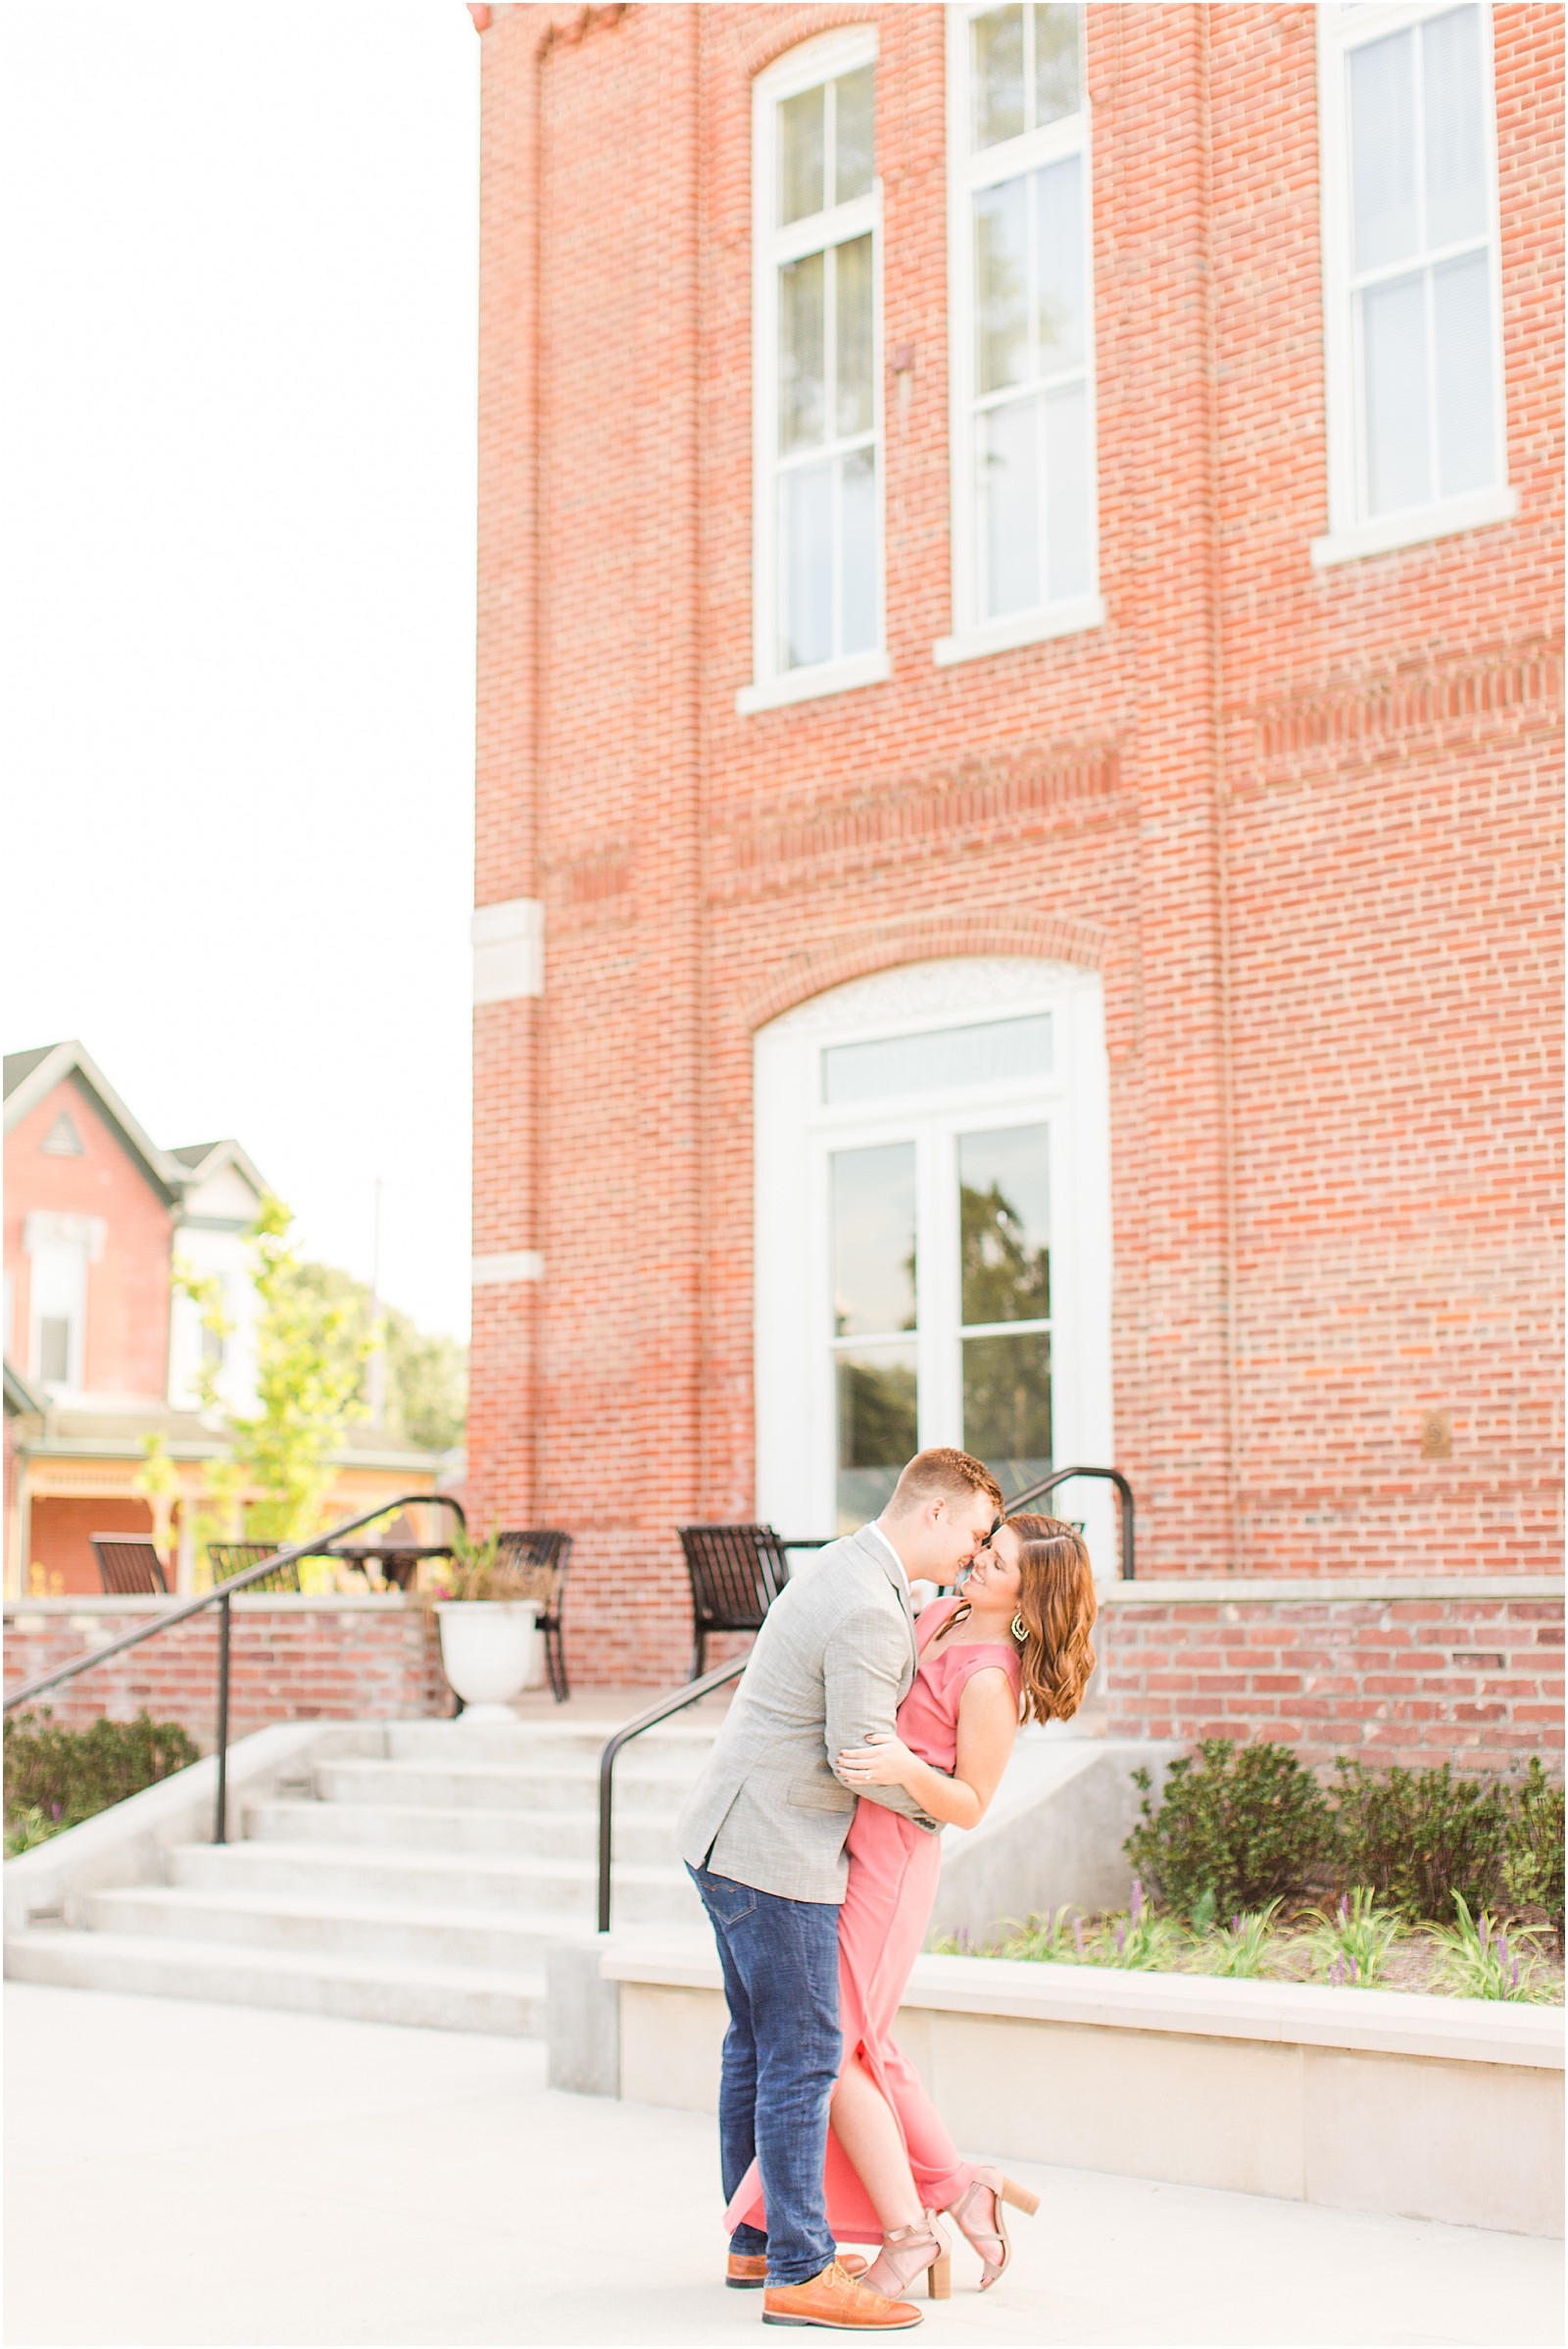 Downtown Huntingburgh Engagement Session | Gabby and Aidan | Bret and Brtandie Photography 010.jpg